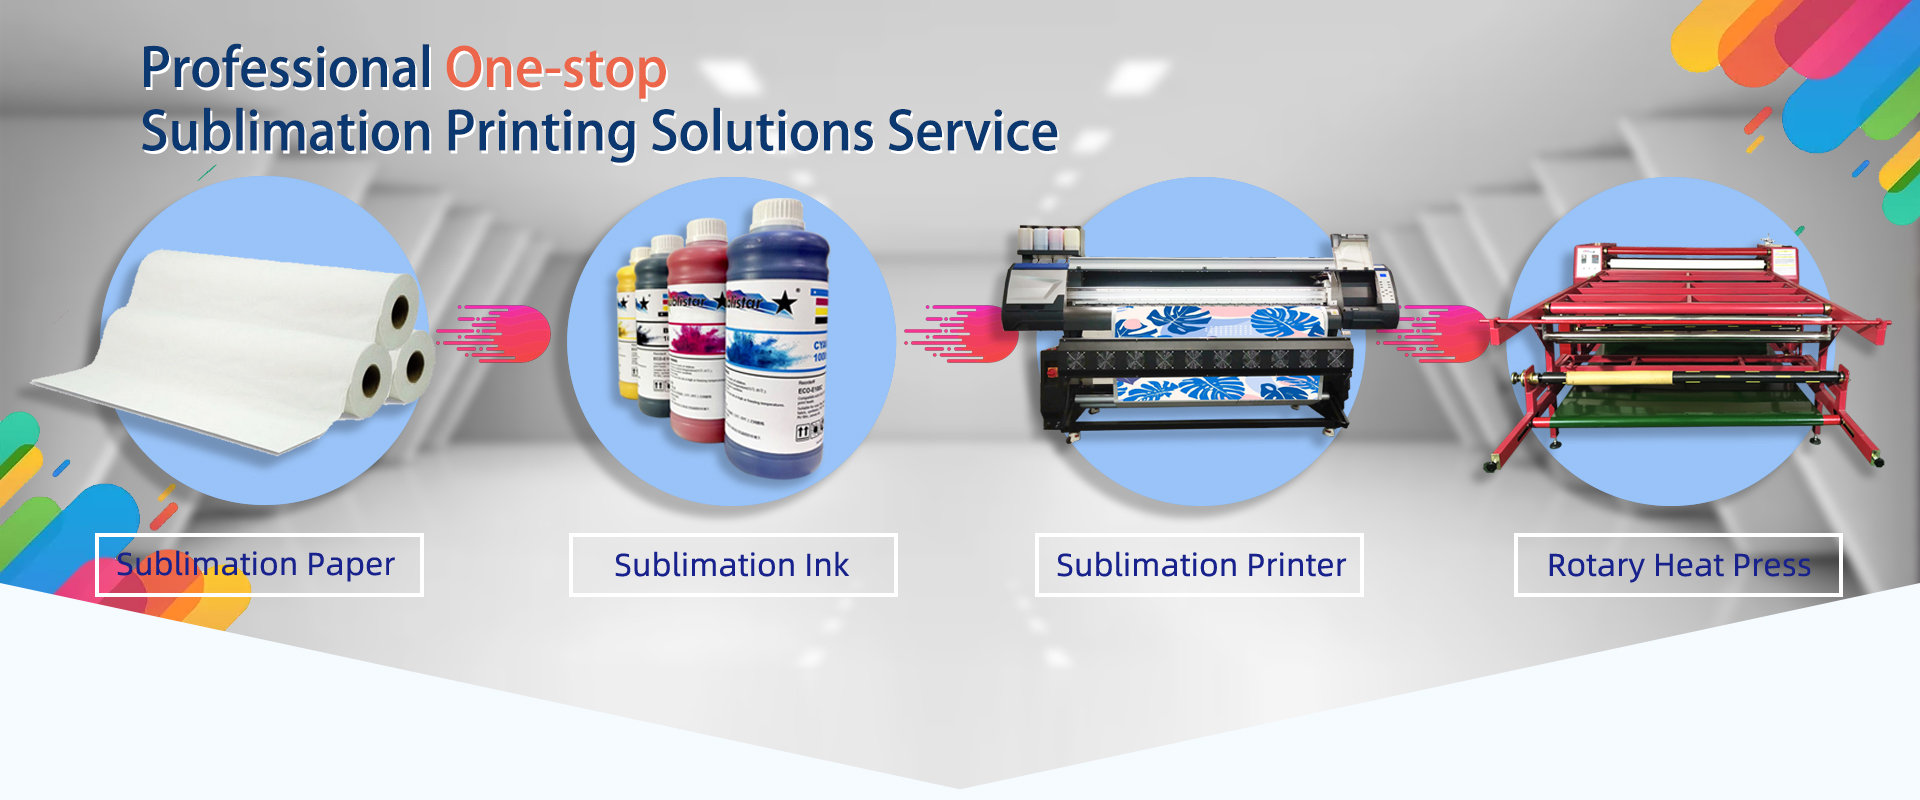 disadvantages of using the sublimation paper